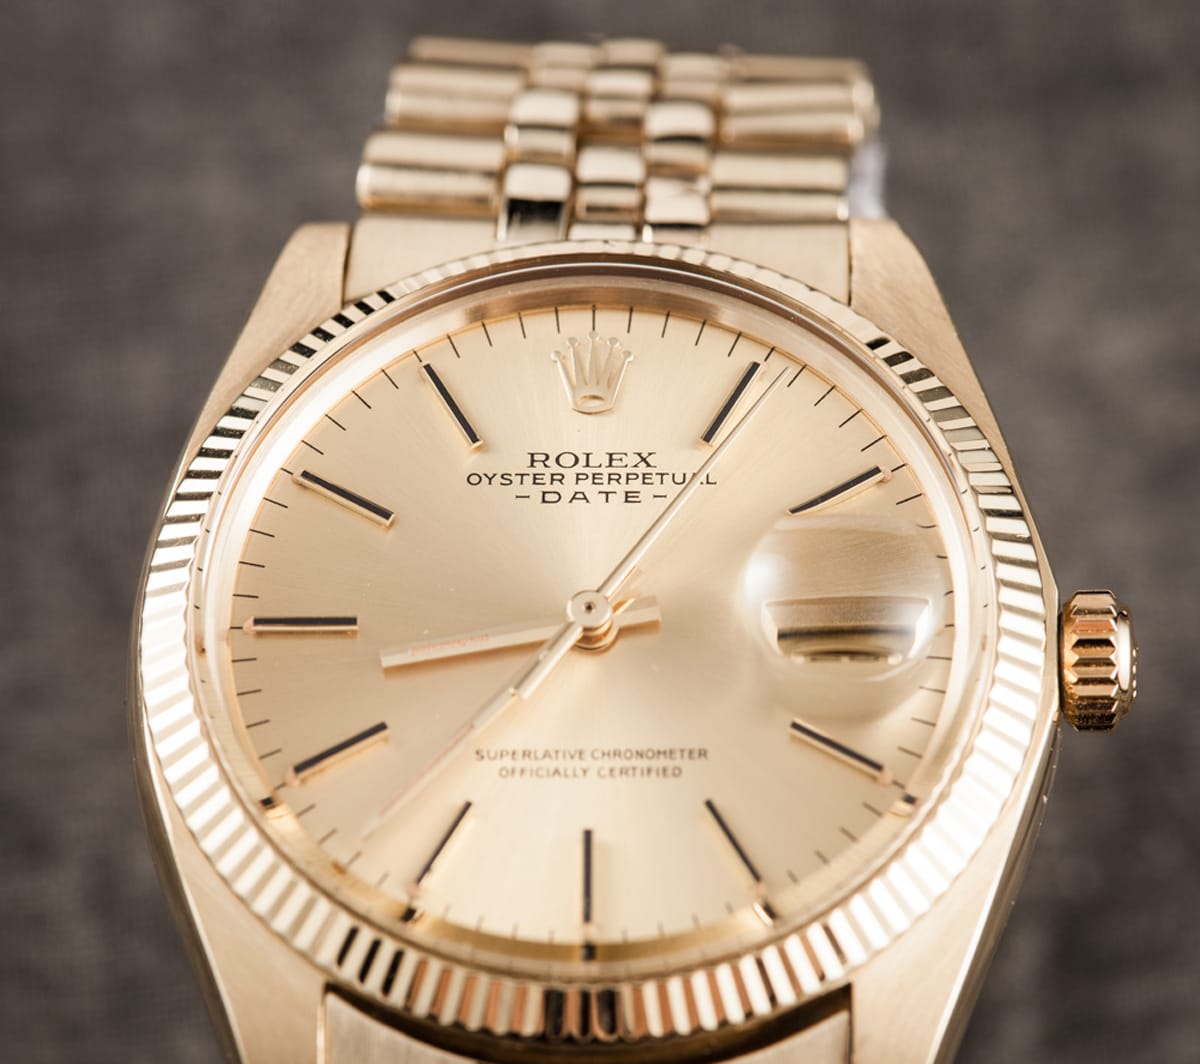 A rolex 1503 dial from Bob's Watches.